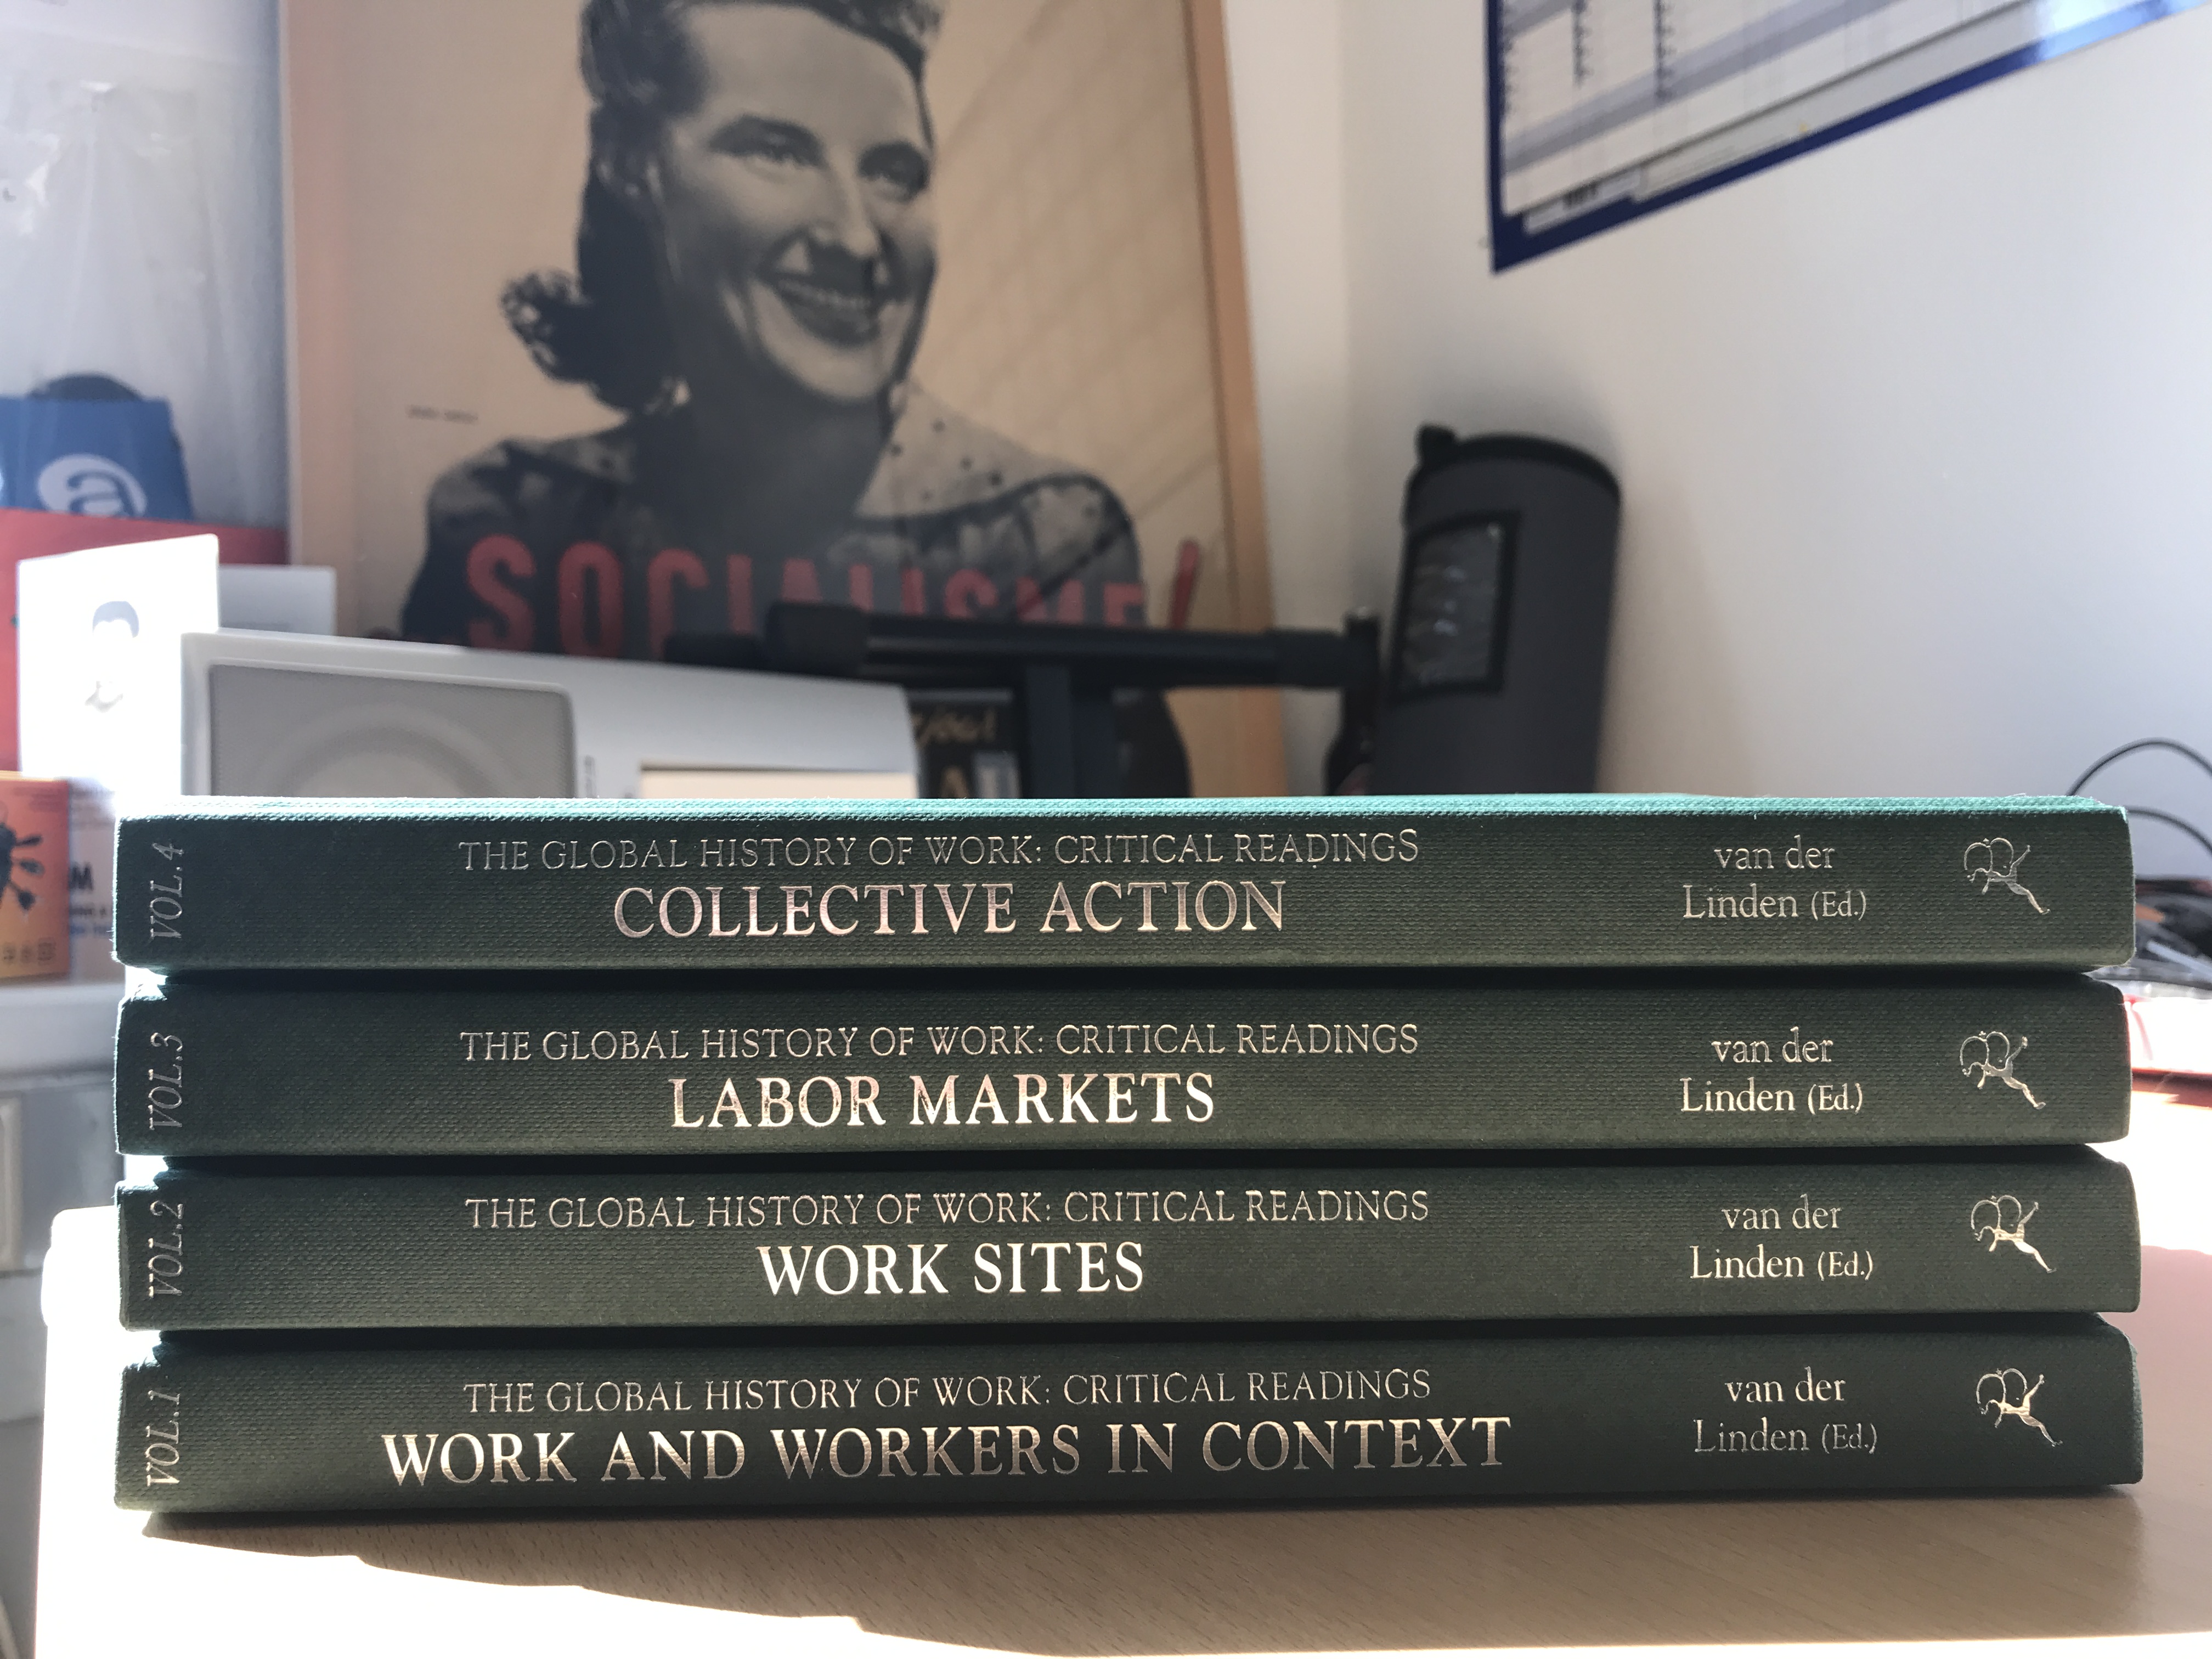 The Global History of Work: Critical Readings